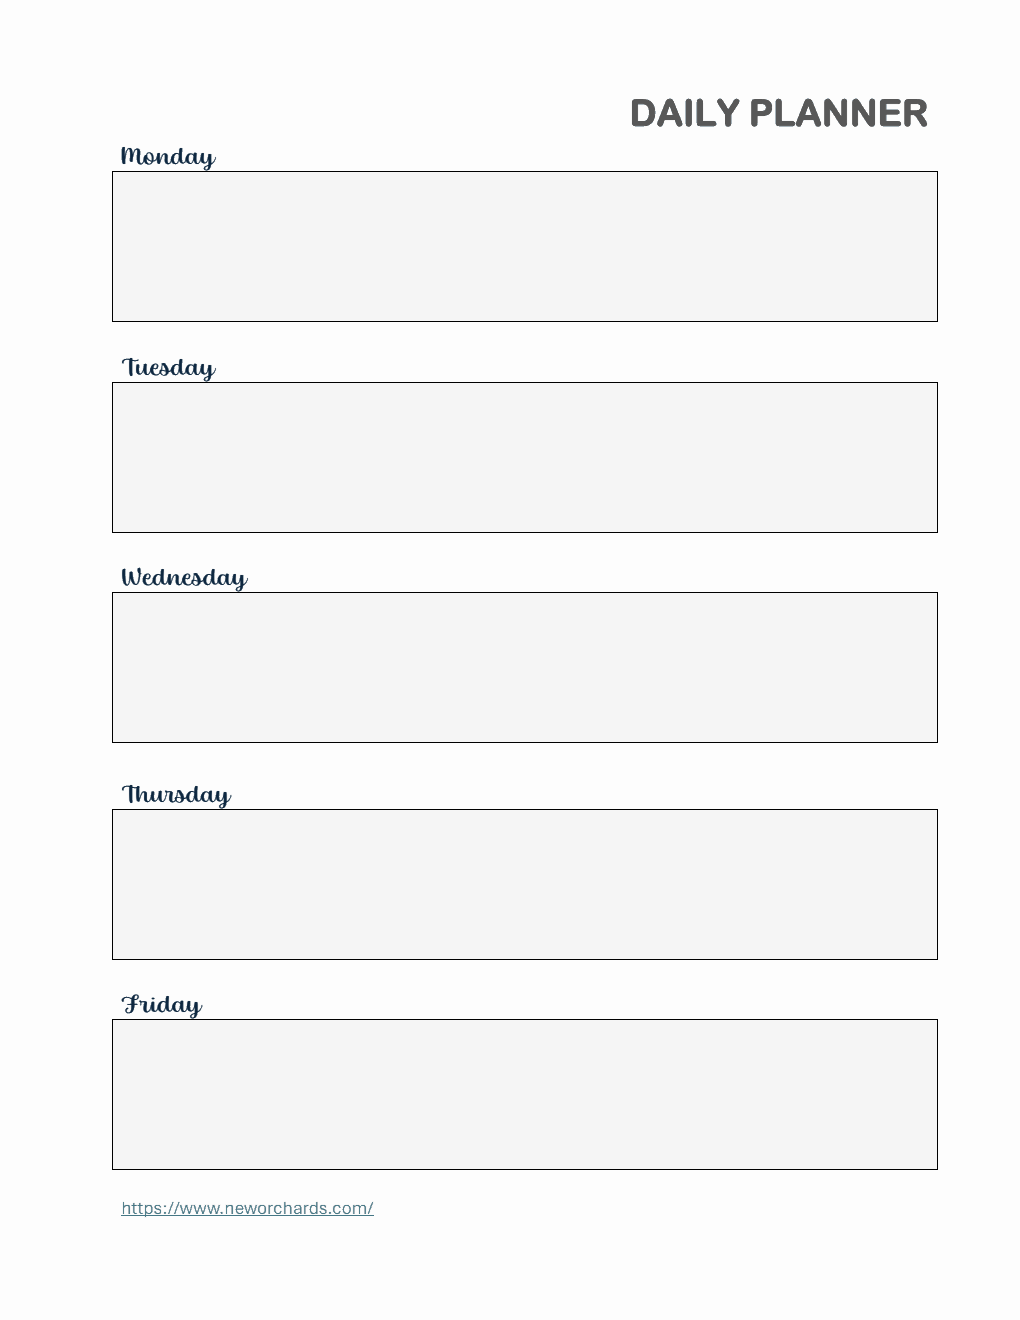 Daily Planner and Checklist Template in Word (Printable)